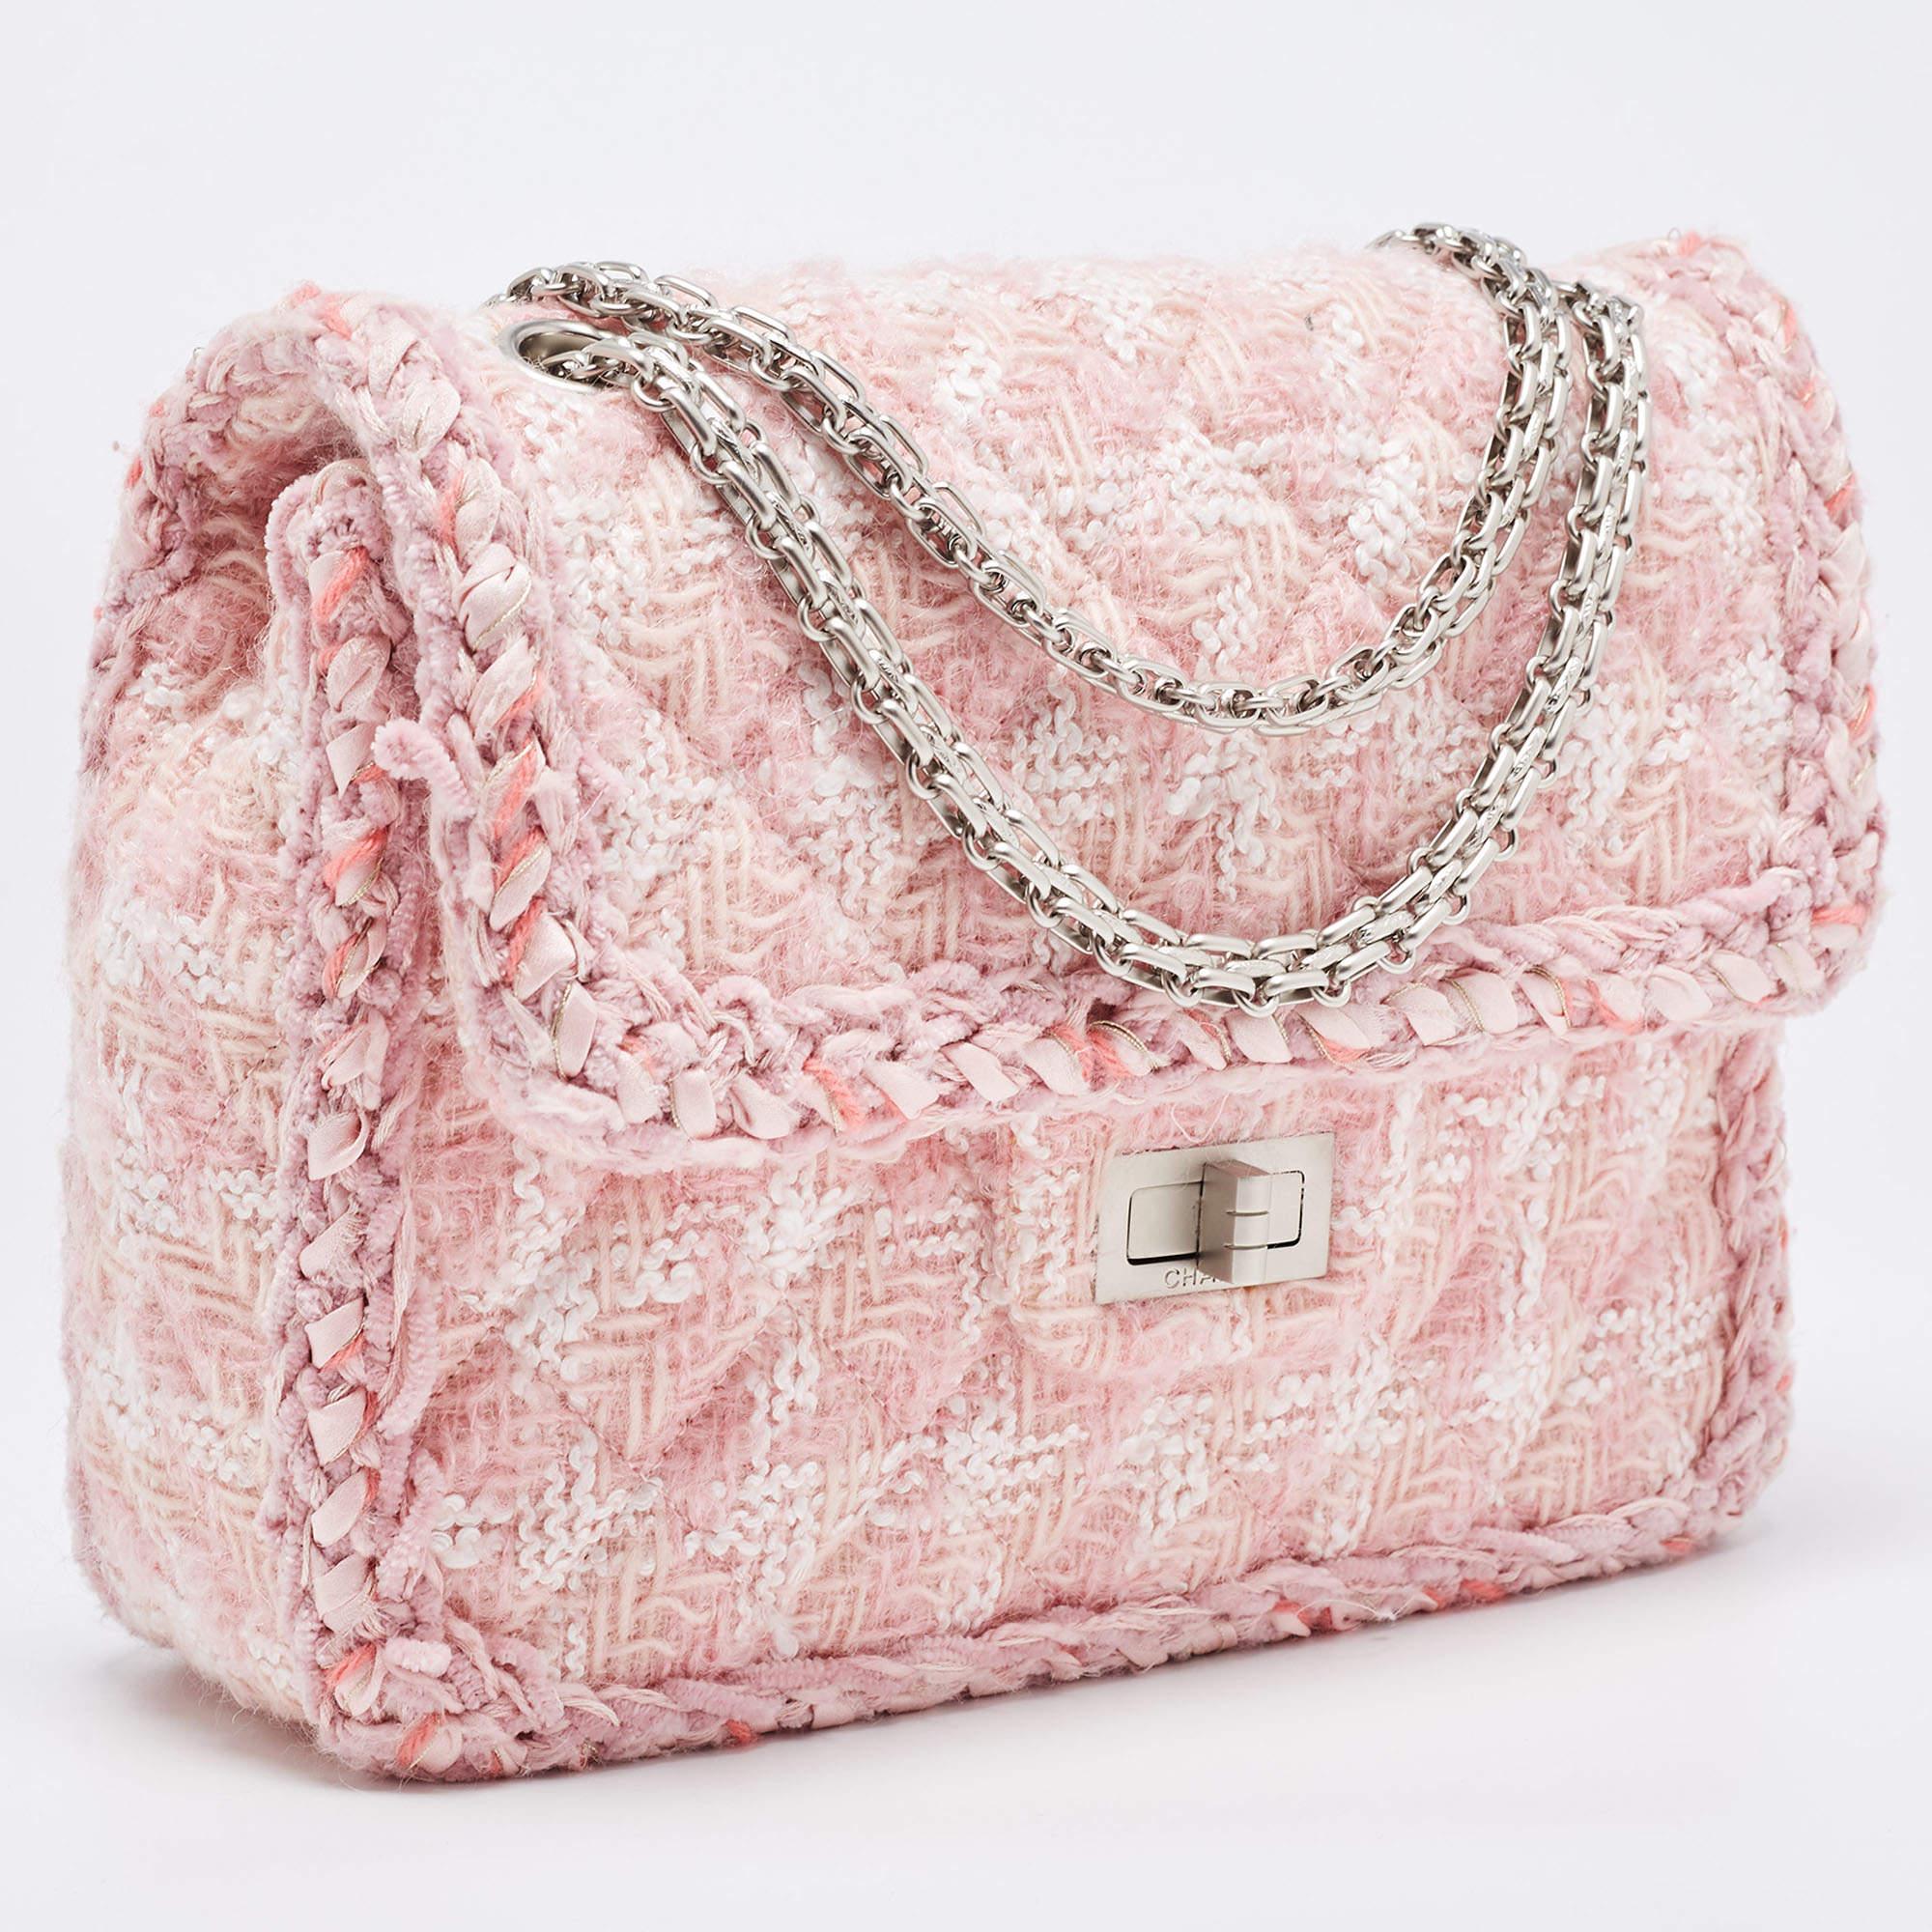 The Chanel Reissue 2.55 Flap Bag is an iconic fashion accessory. Crafted from luxurious pink tweed, it features the classic quilted pattern and a reissue lock. The square shape and chain strap make it a timeless and elegant addition to any outfit.

